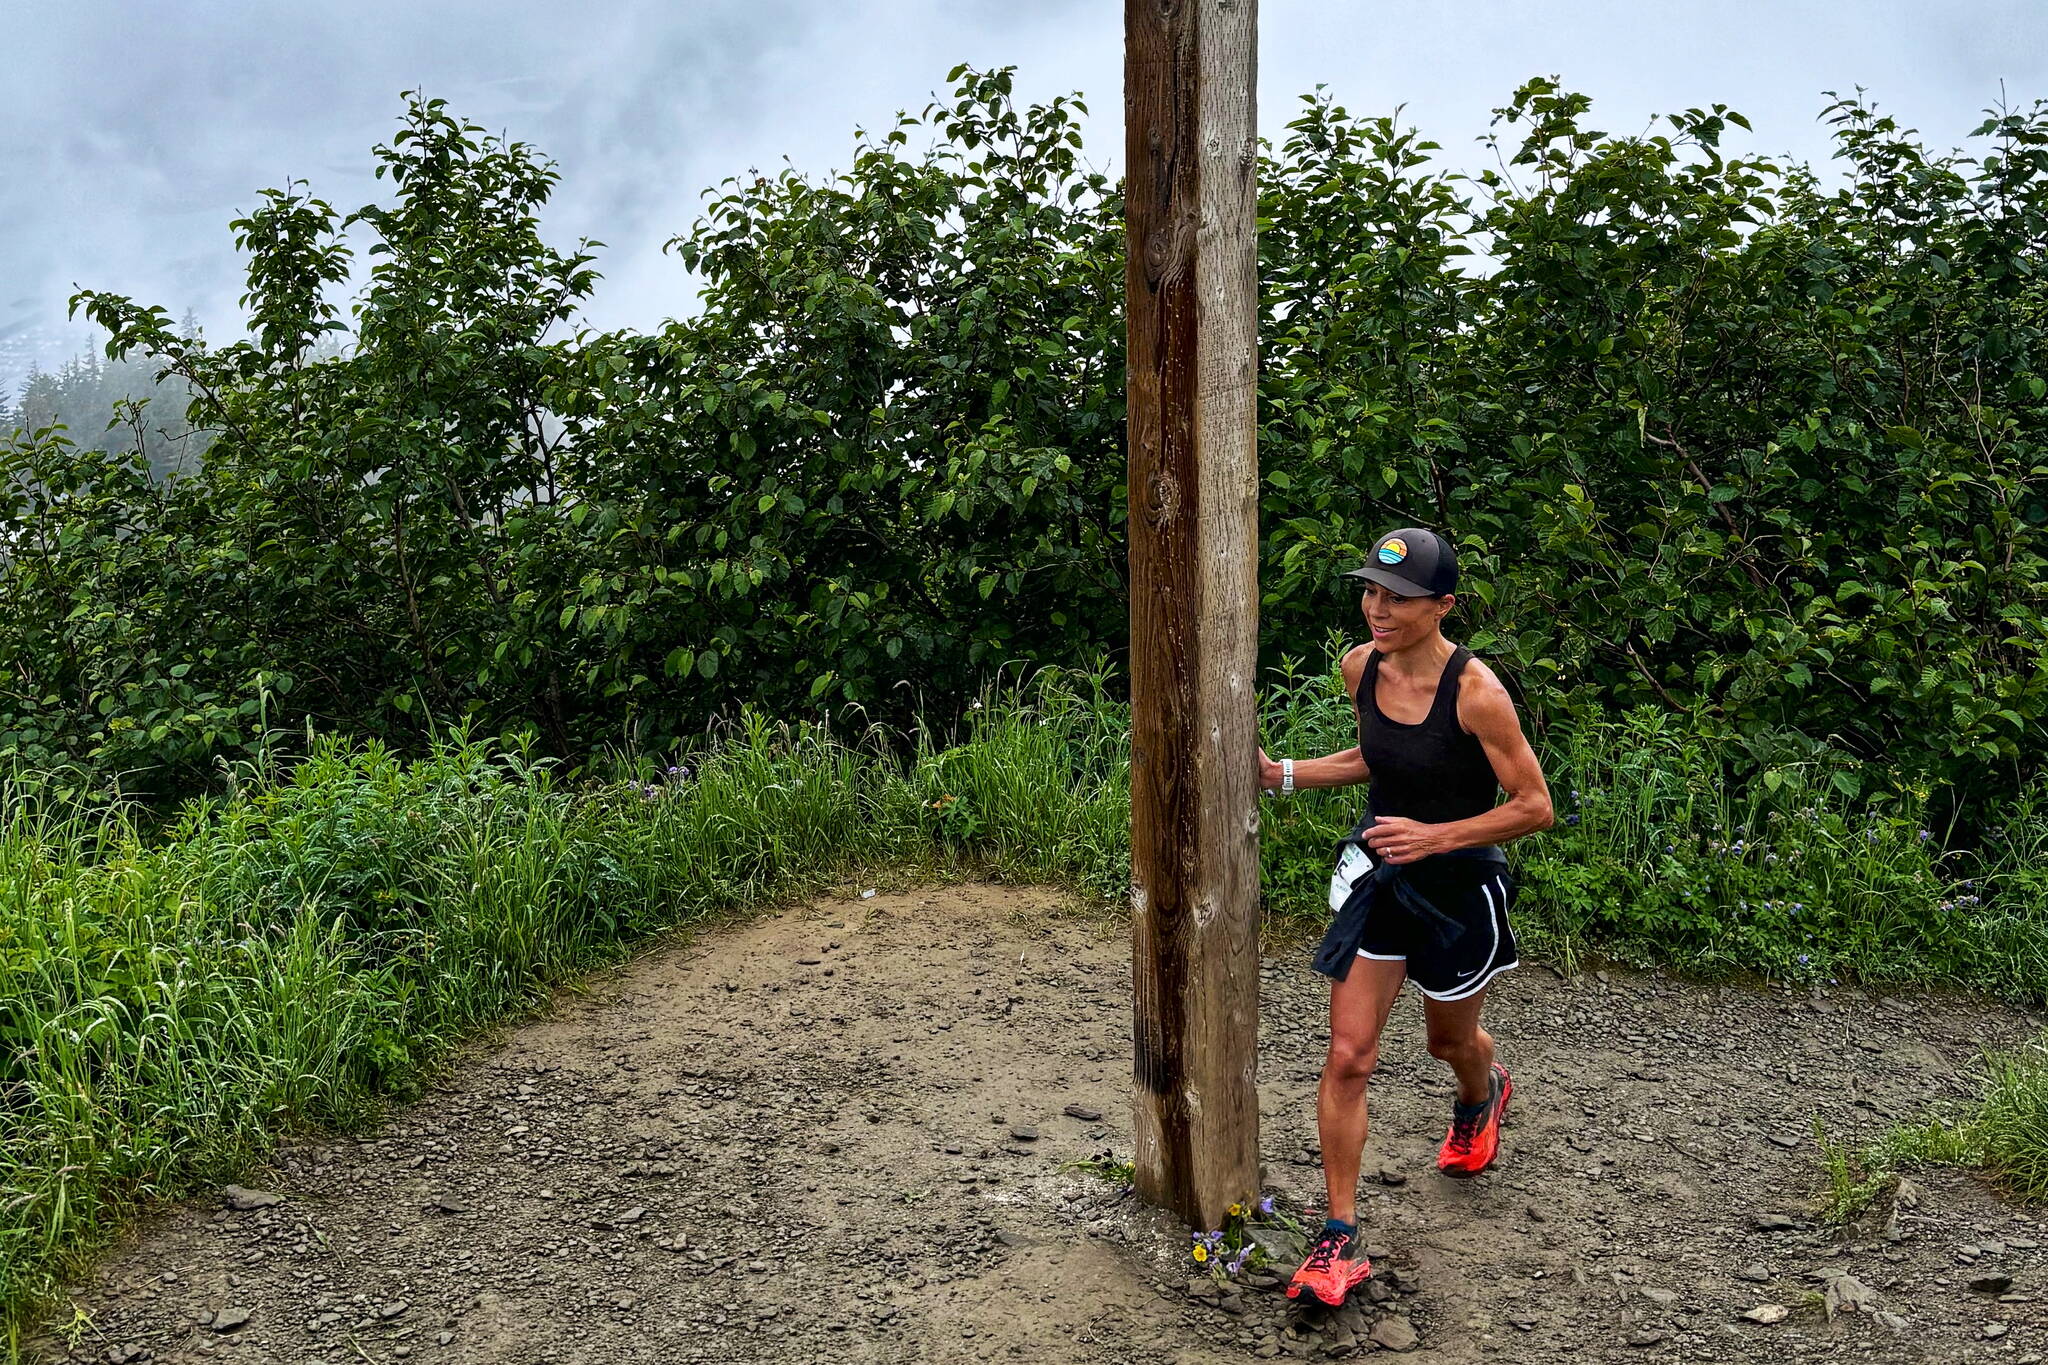 Heidi Reifenstein reaches Father Brown’s Cross to complete the Goldbelt Tram-Mount Roberts Trail Run on Saturday, setting a new women’s record for the 3½-mile race with a time of 37 minutes and 40 seconds. (Photo by Jeff Gnass)